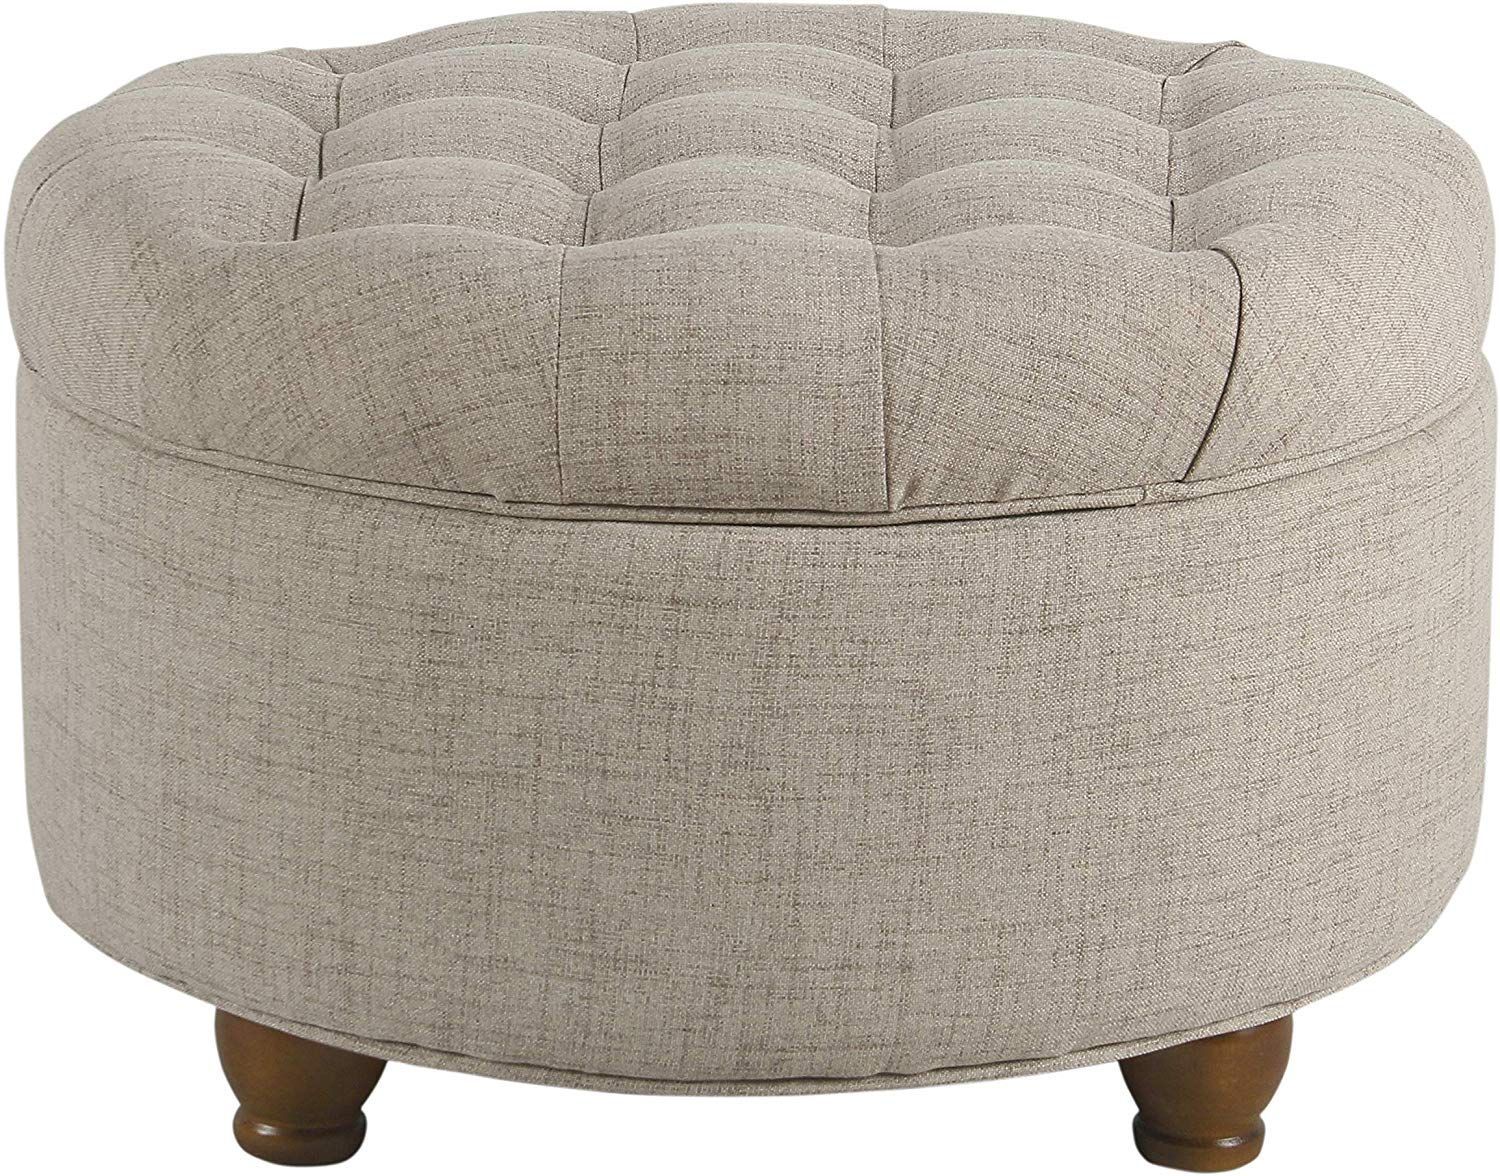 Amazonsmile: Homepop Large Button Tufted Round Storage Ottoman, Tan And Regarding Cream Linen And Fir Wood Round Ottomans (View 4 of 20)